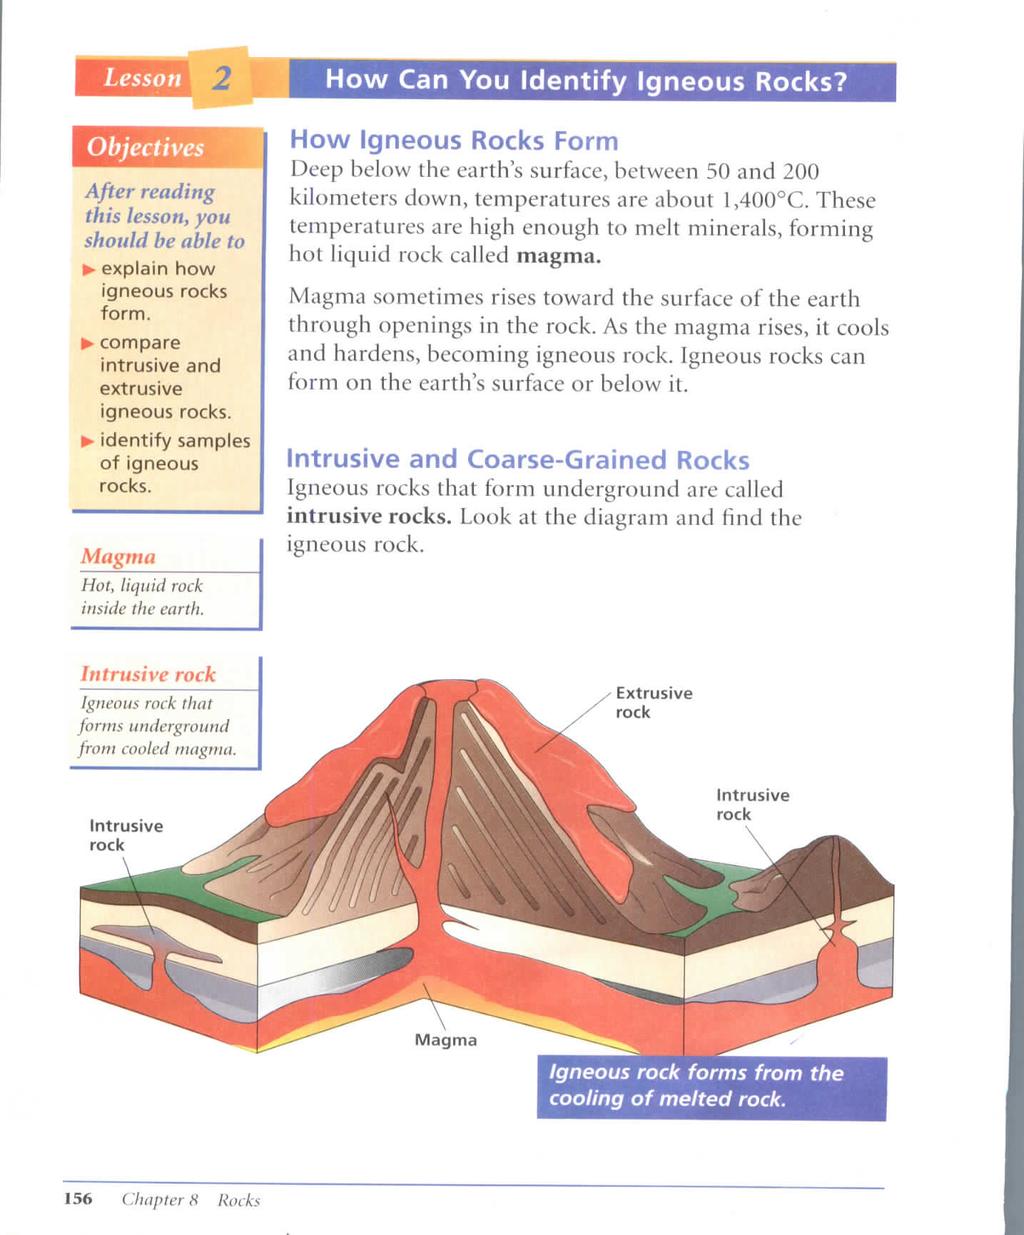 Lesson Objectives After reading this lesson, you should be able to >- explain how igneous rocks form.» compare intrusive and extrusive igneous rocks. * identify samples of igneous rocks.